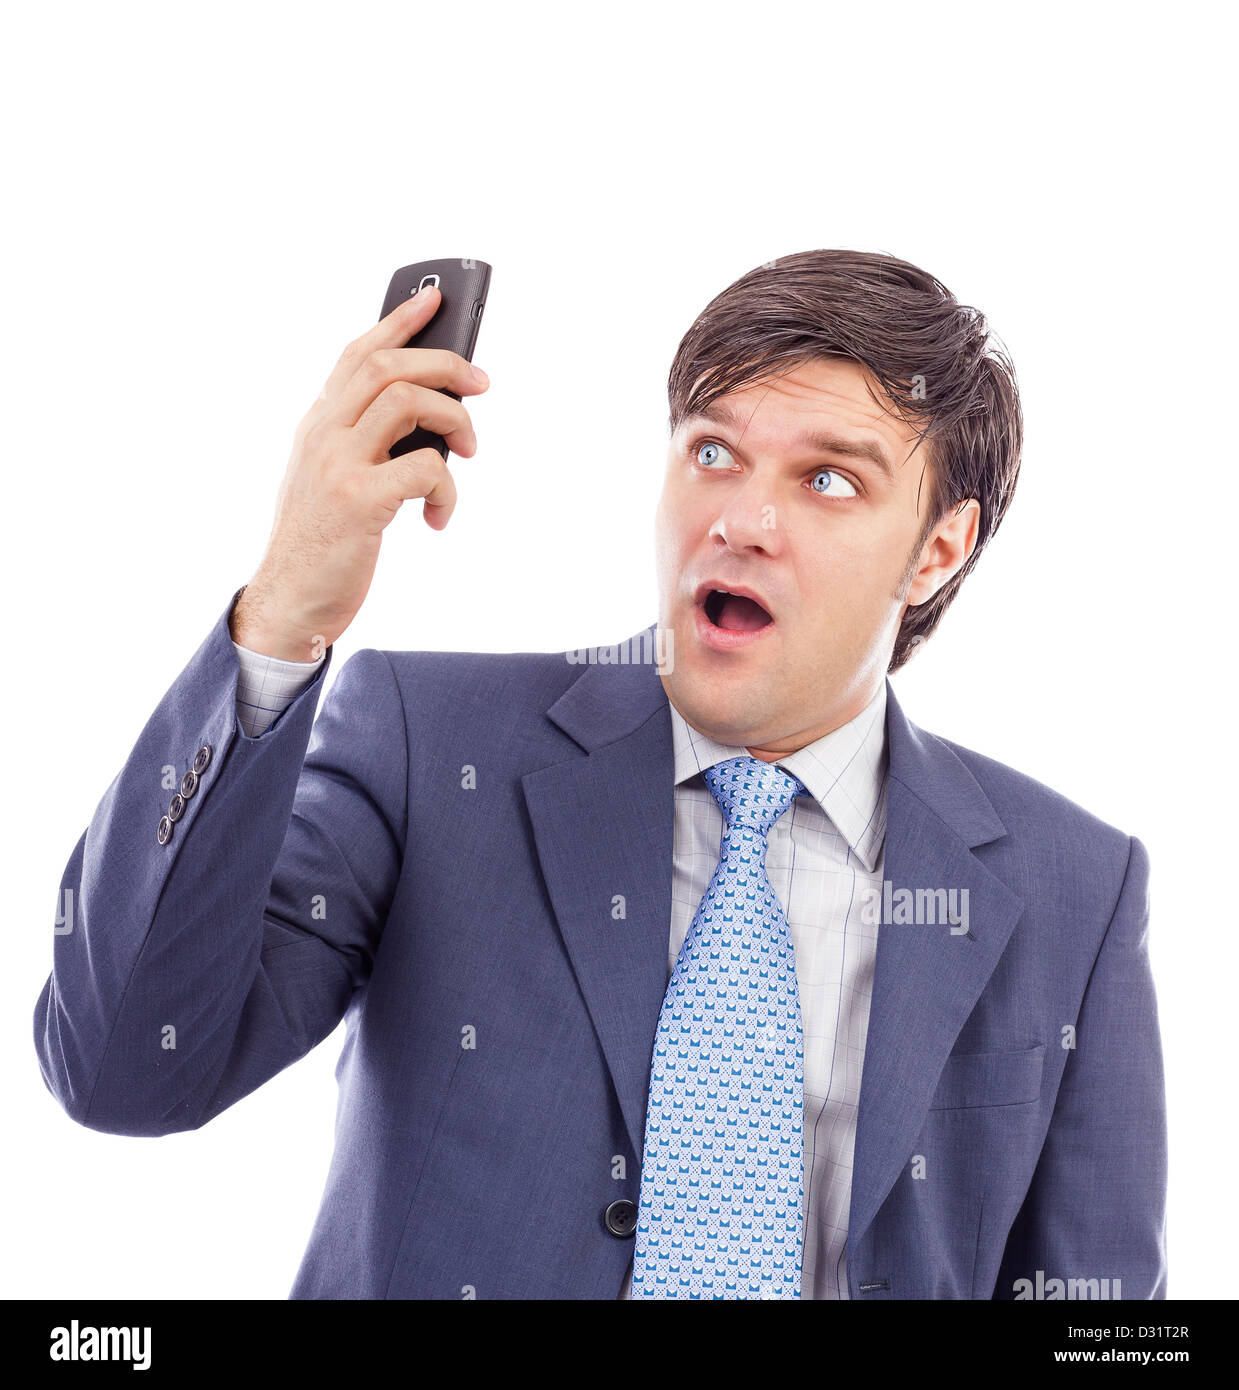 Young businessman holding a mobile phone and looking surprised against white Stock Photo